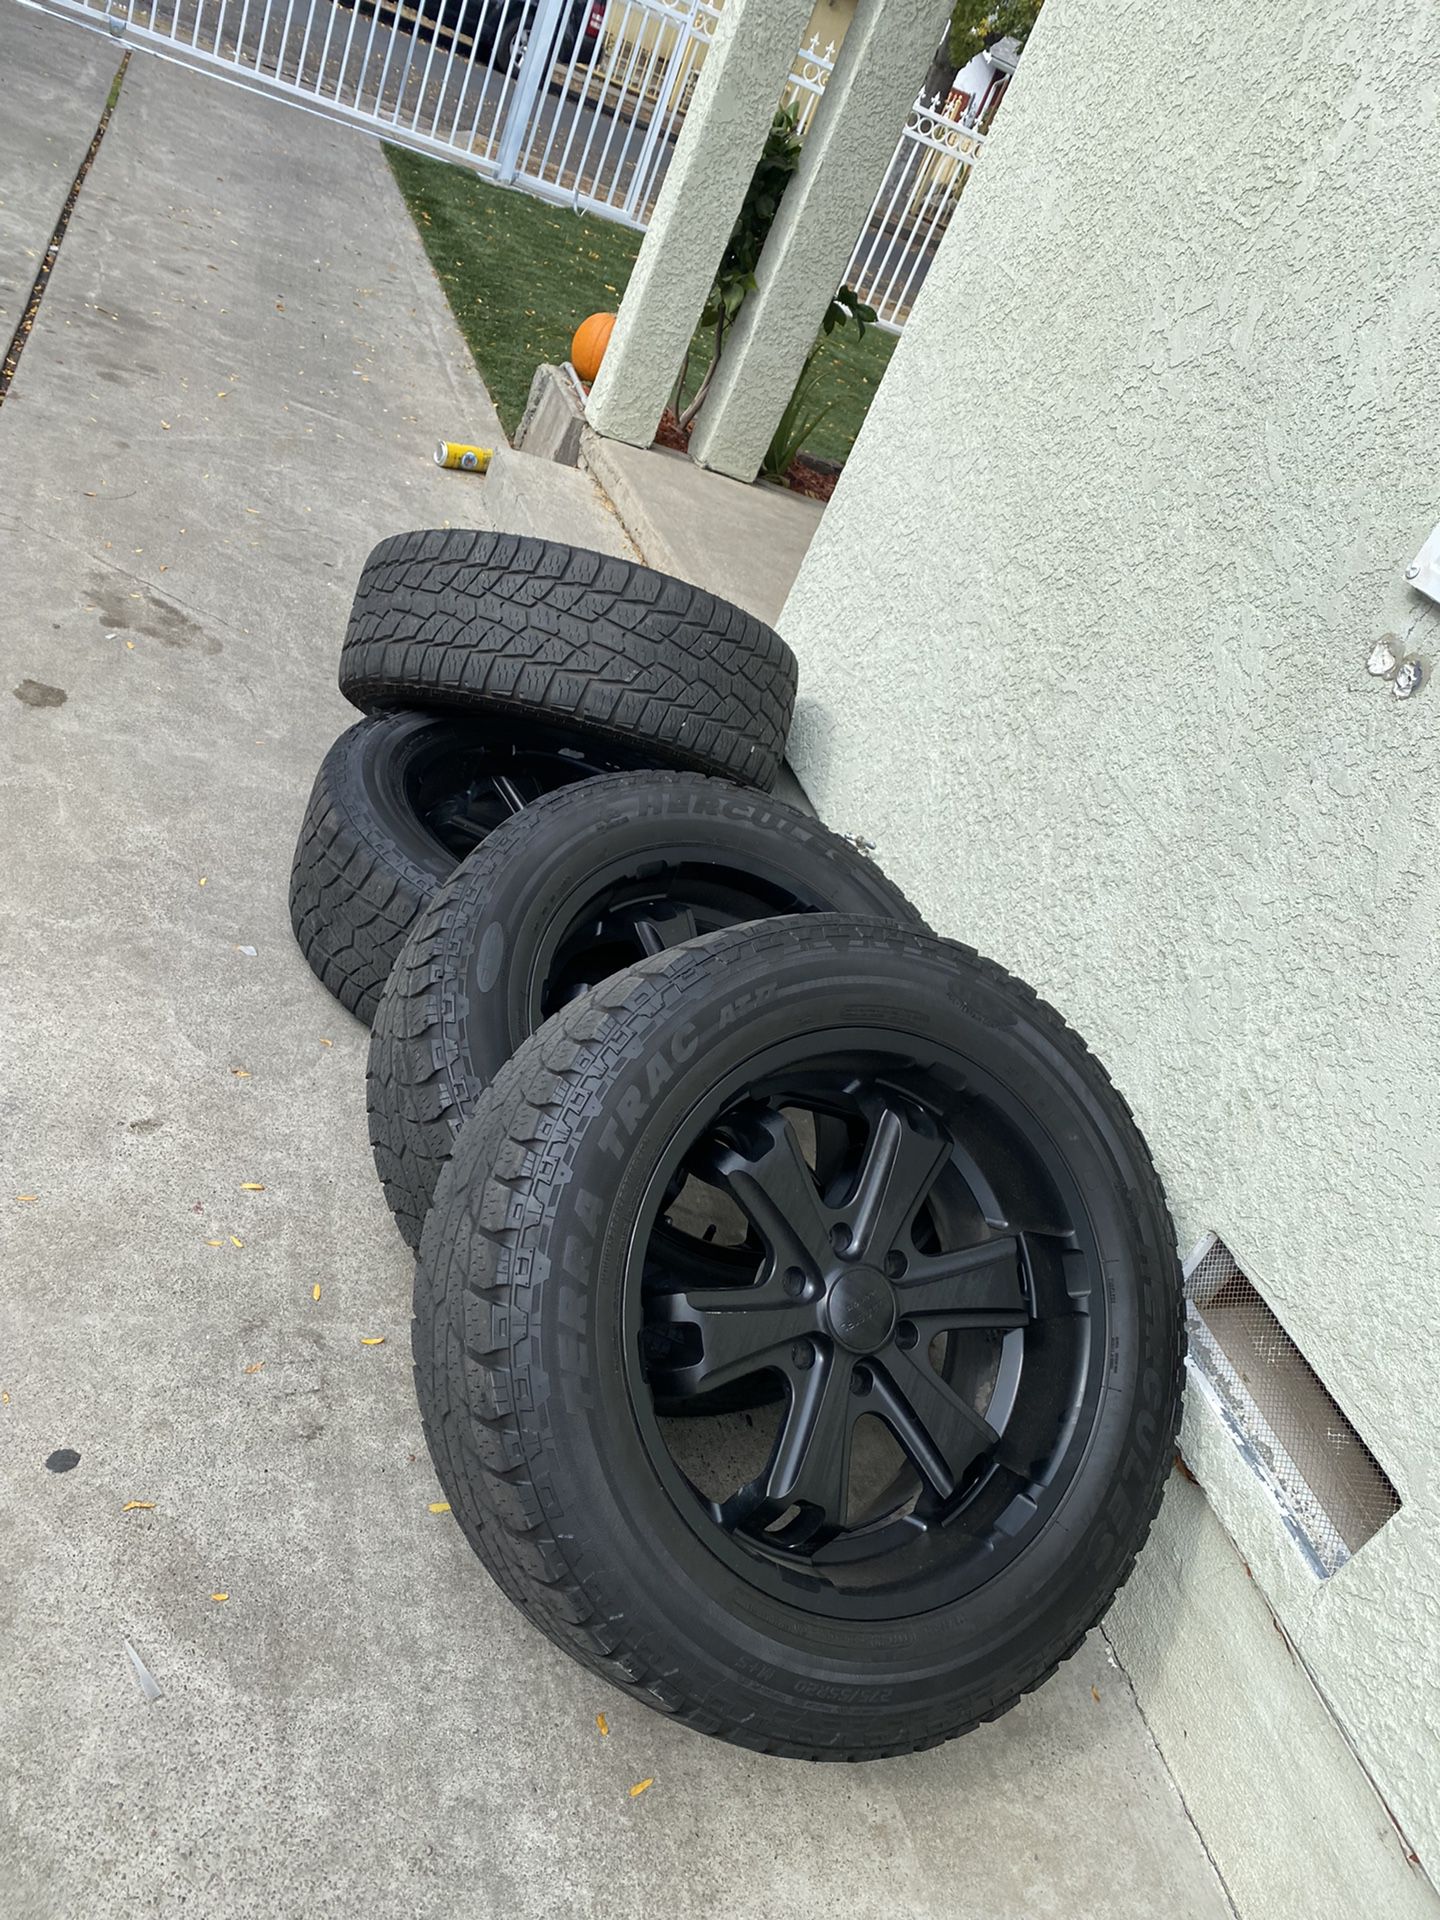 20 inch rims with 70% of life tire